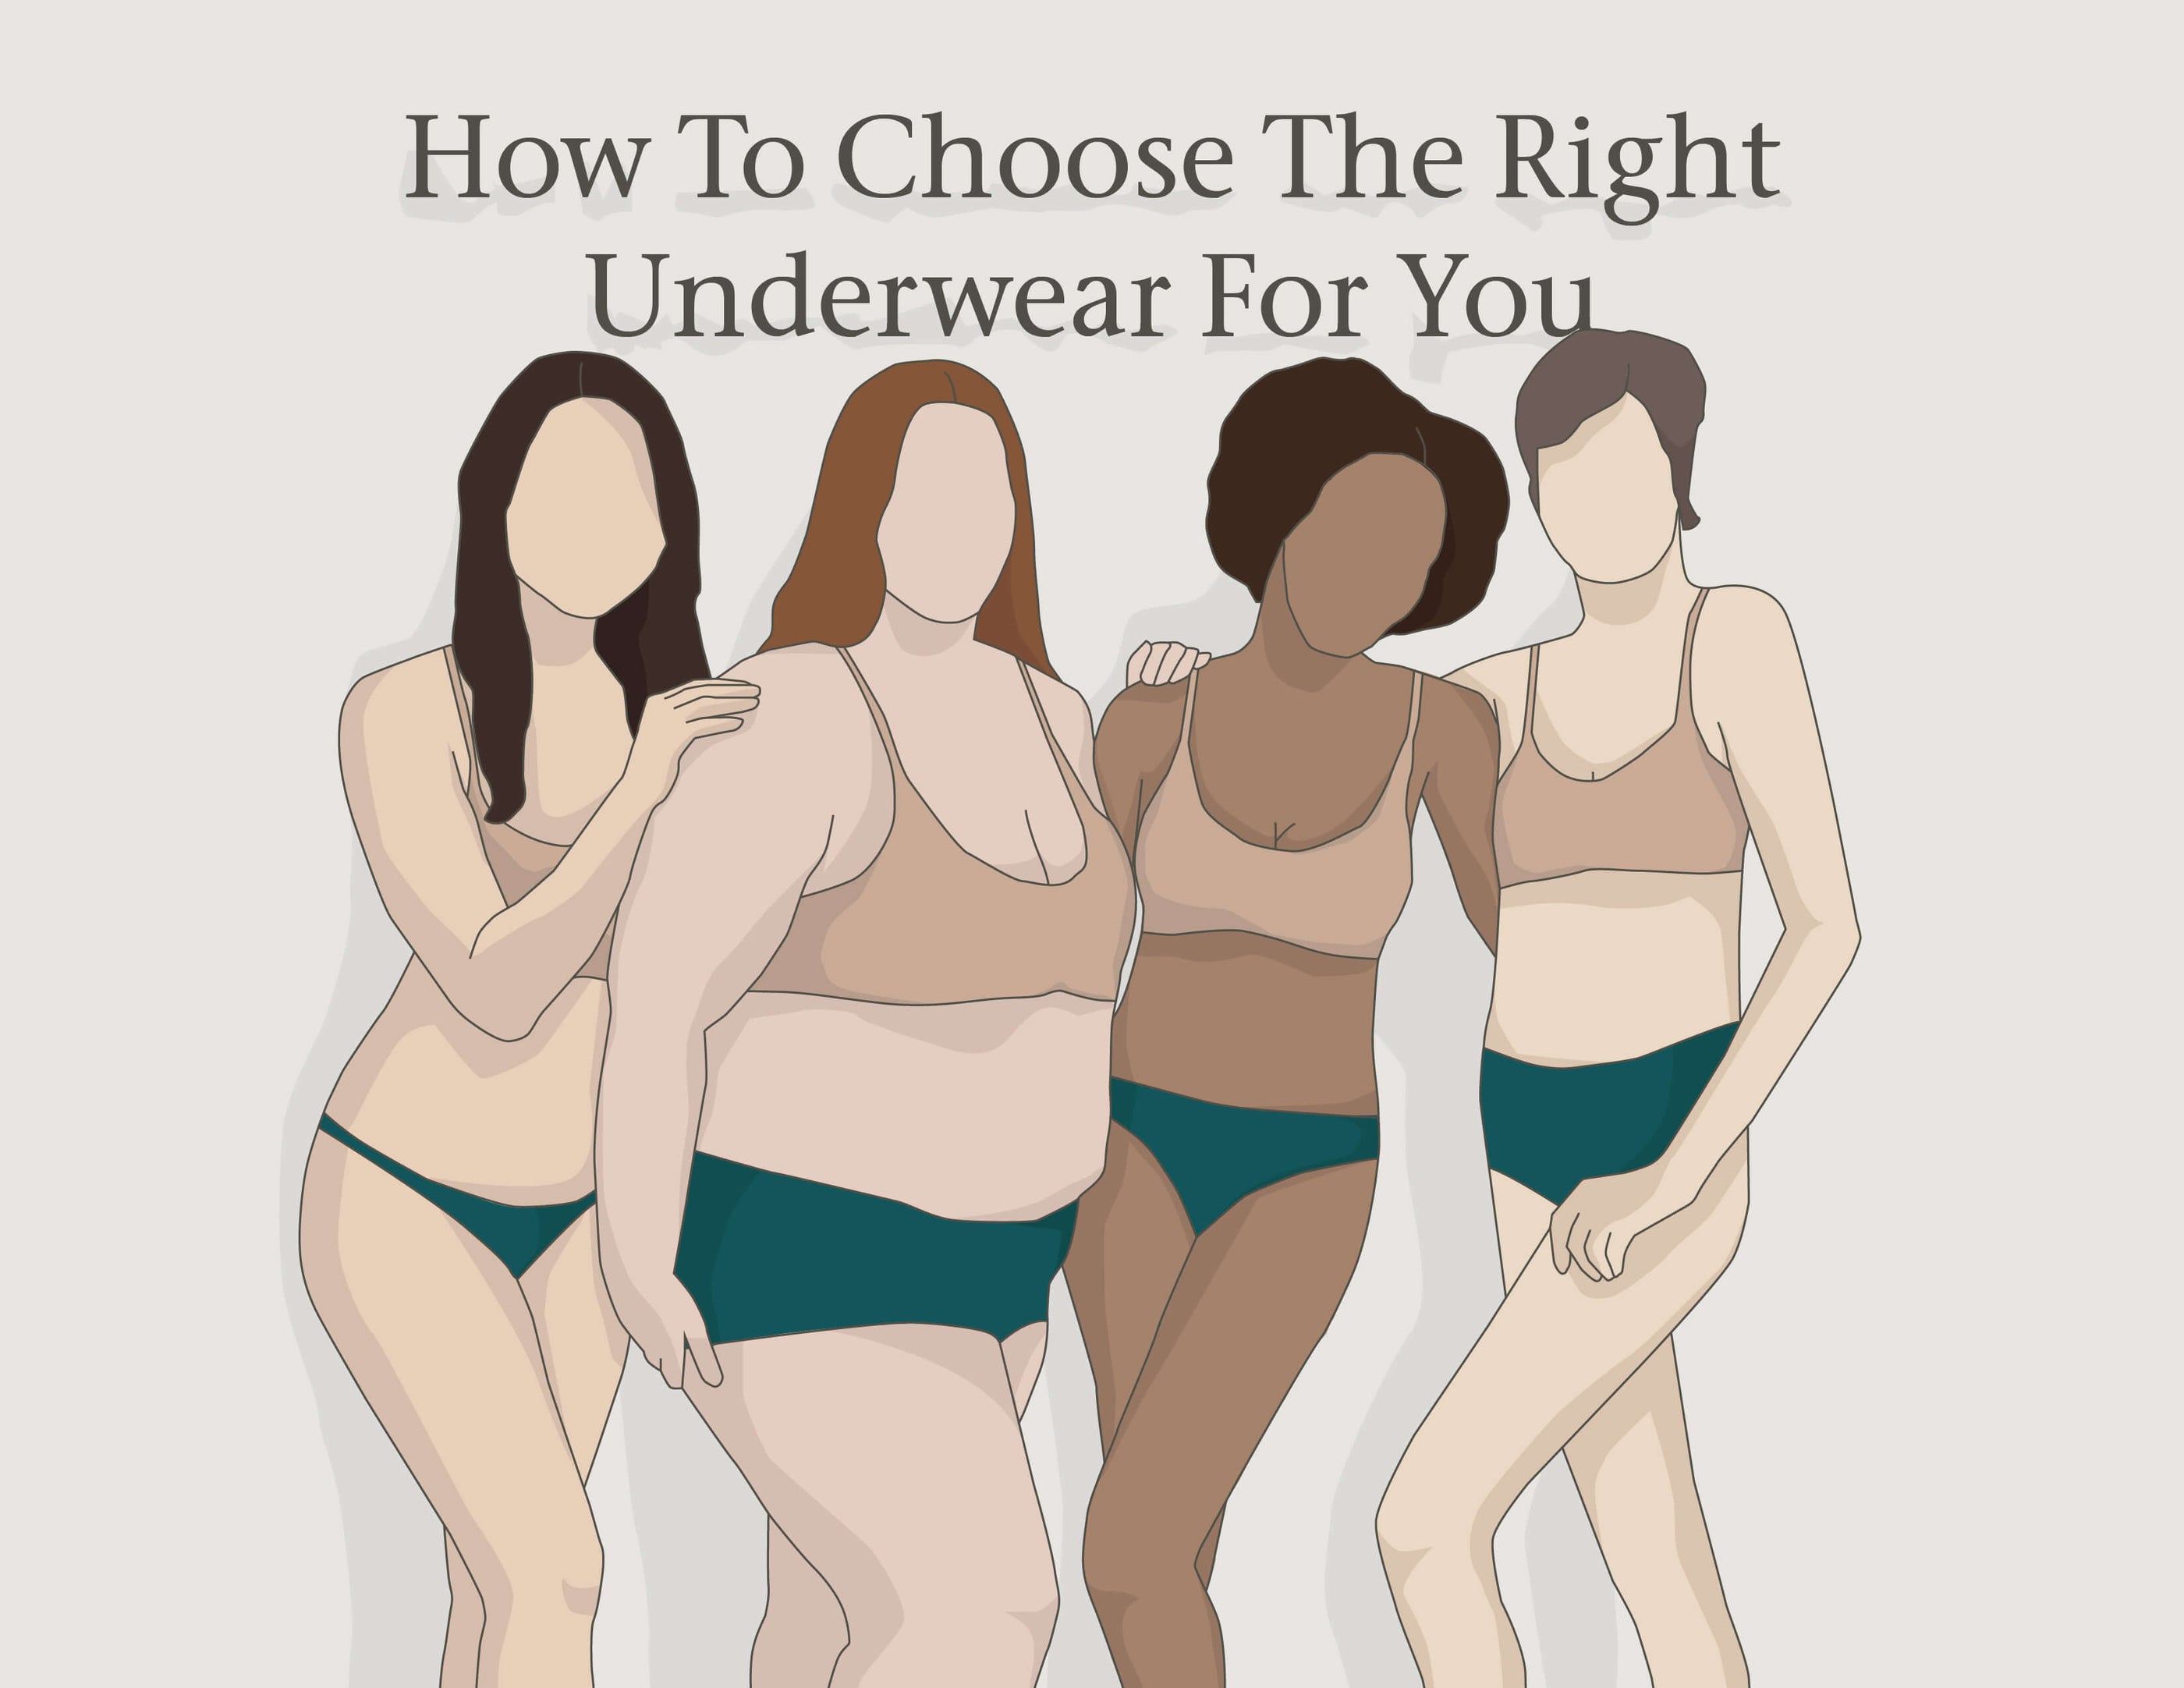 Lingerie Brands Guide: Find Your Perfect Match for Every Occasion